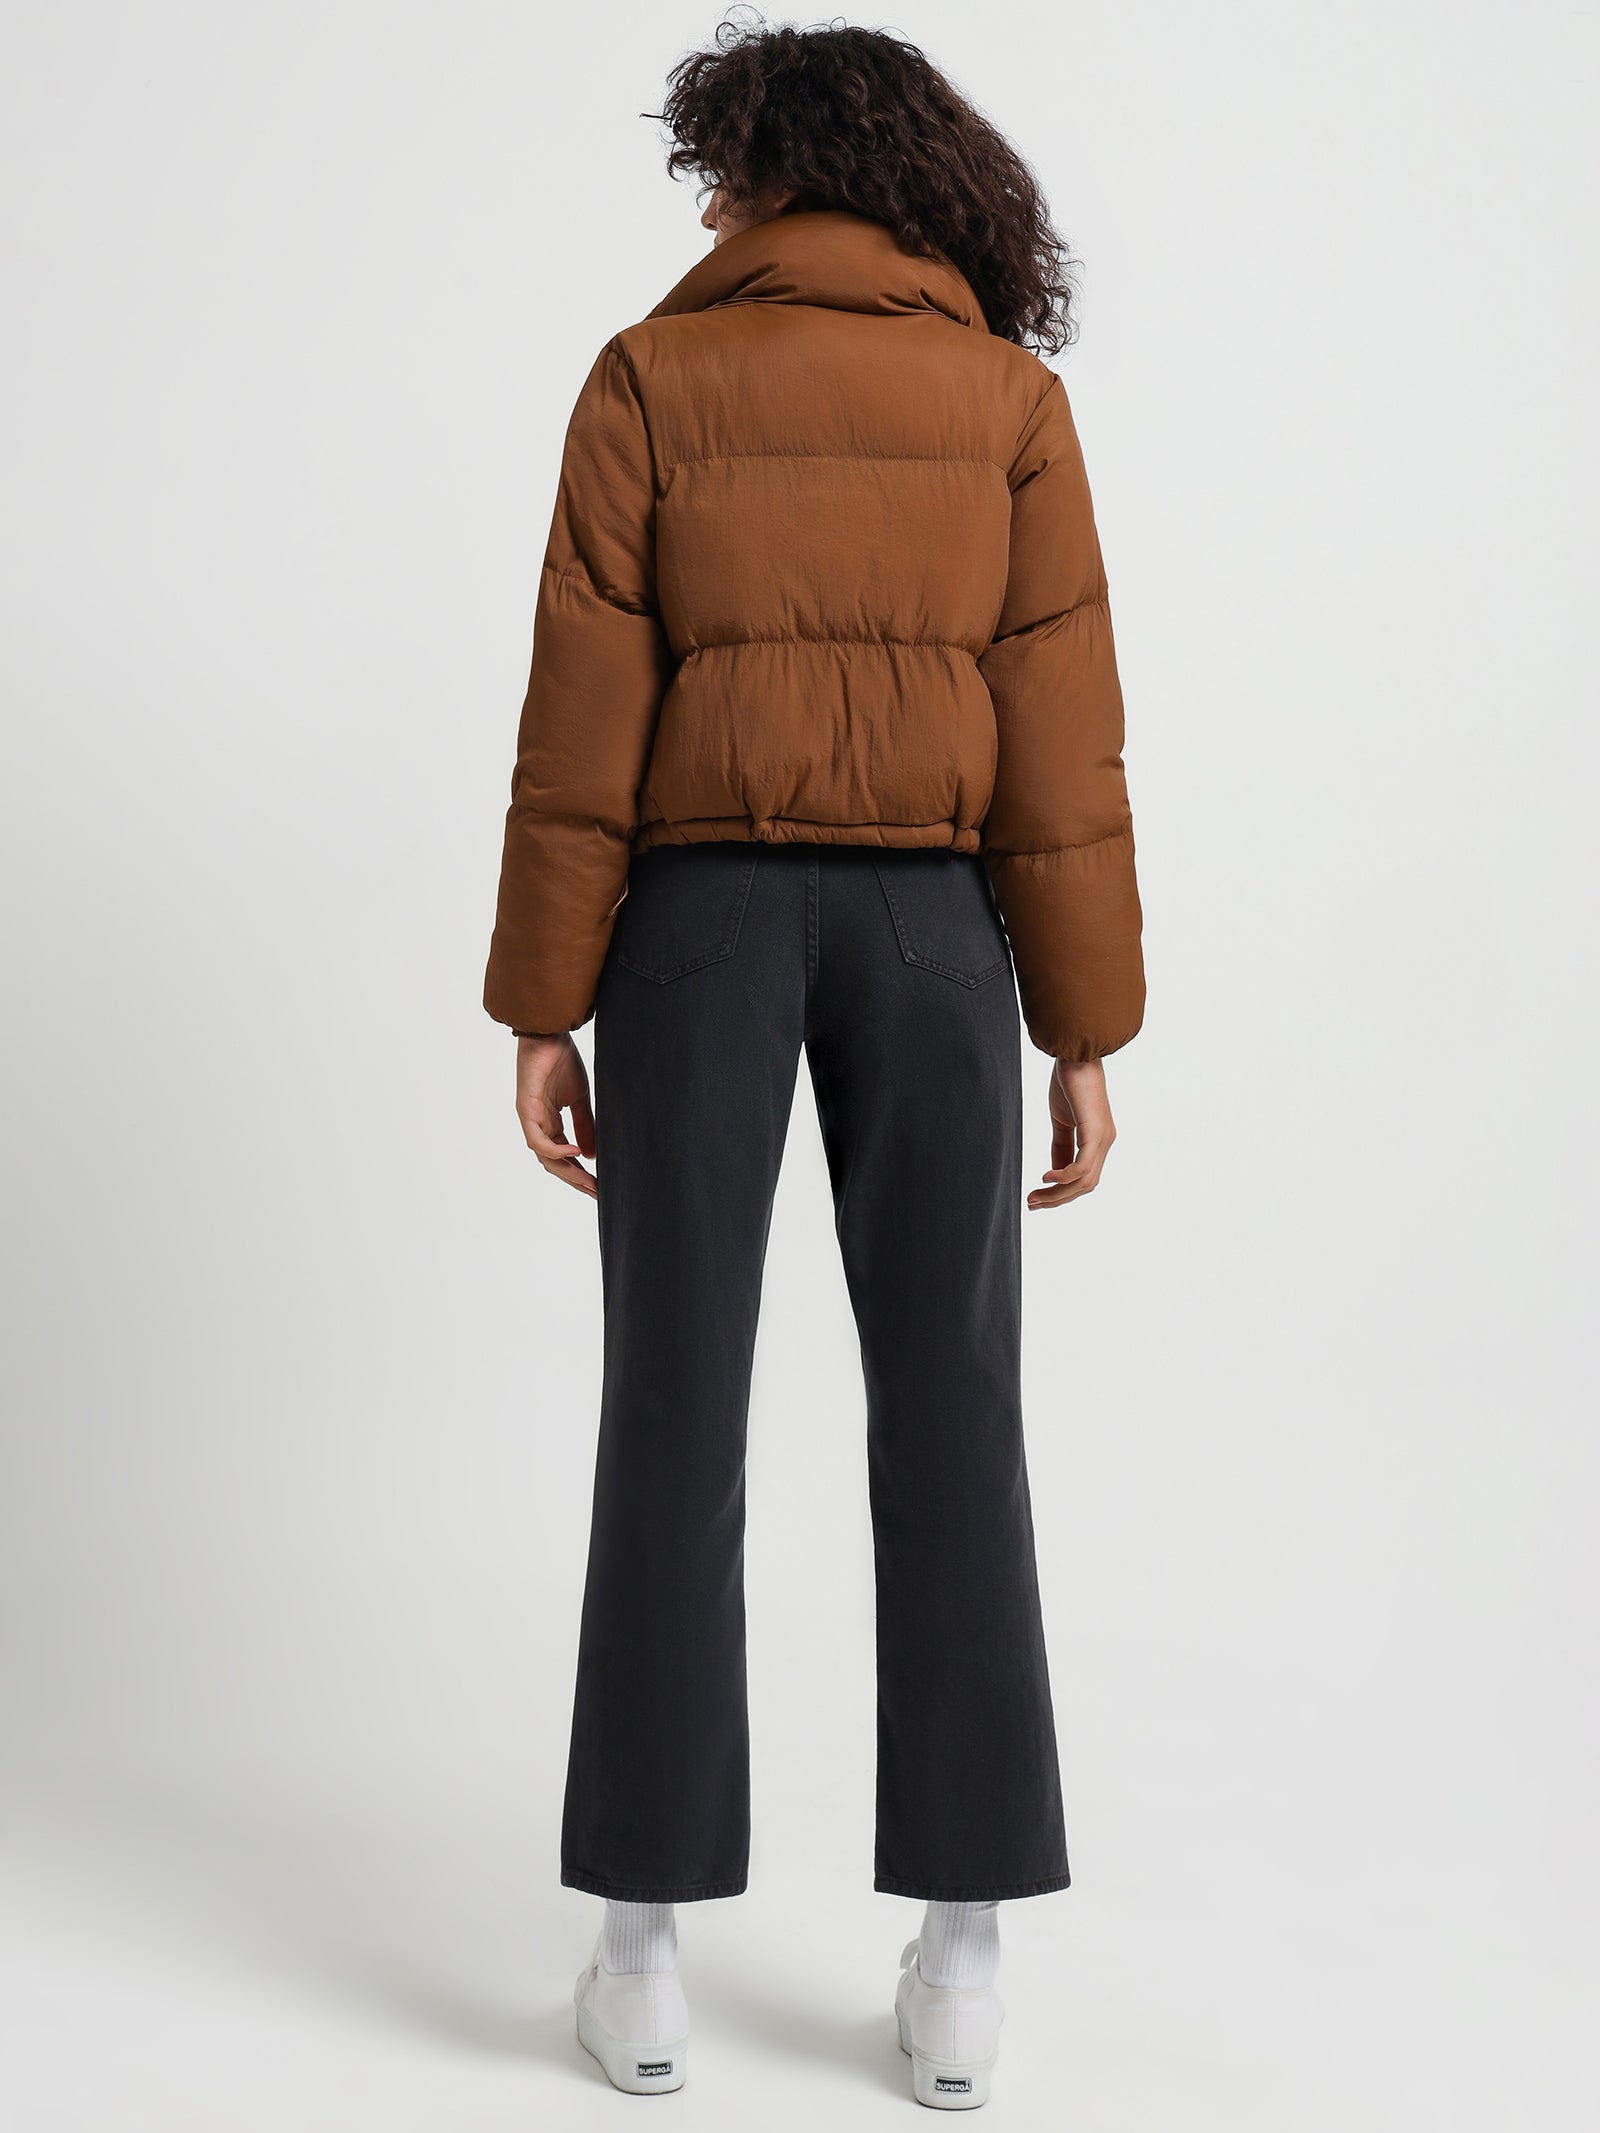 Topher Puffer Jacket in Toffee